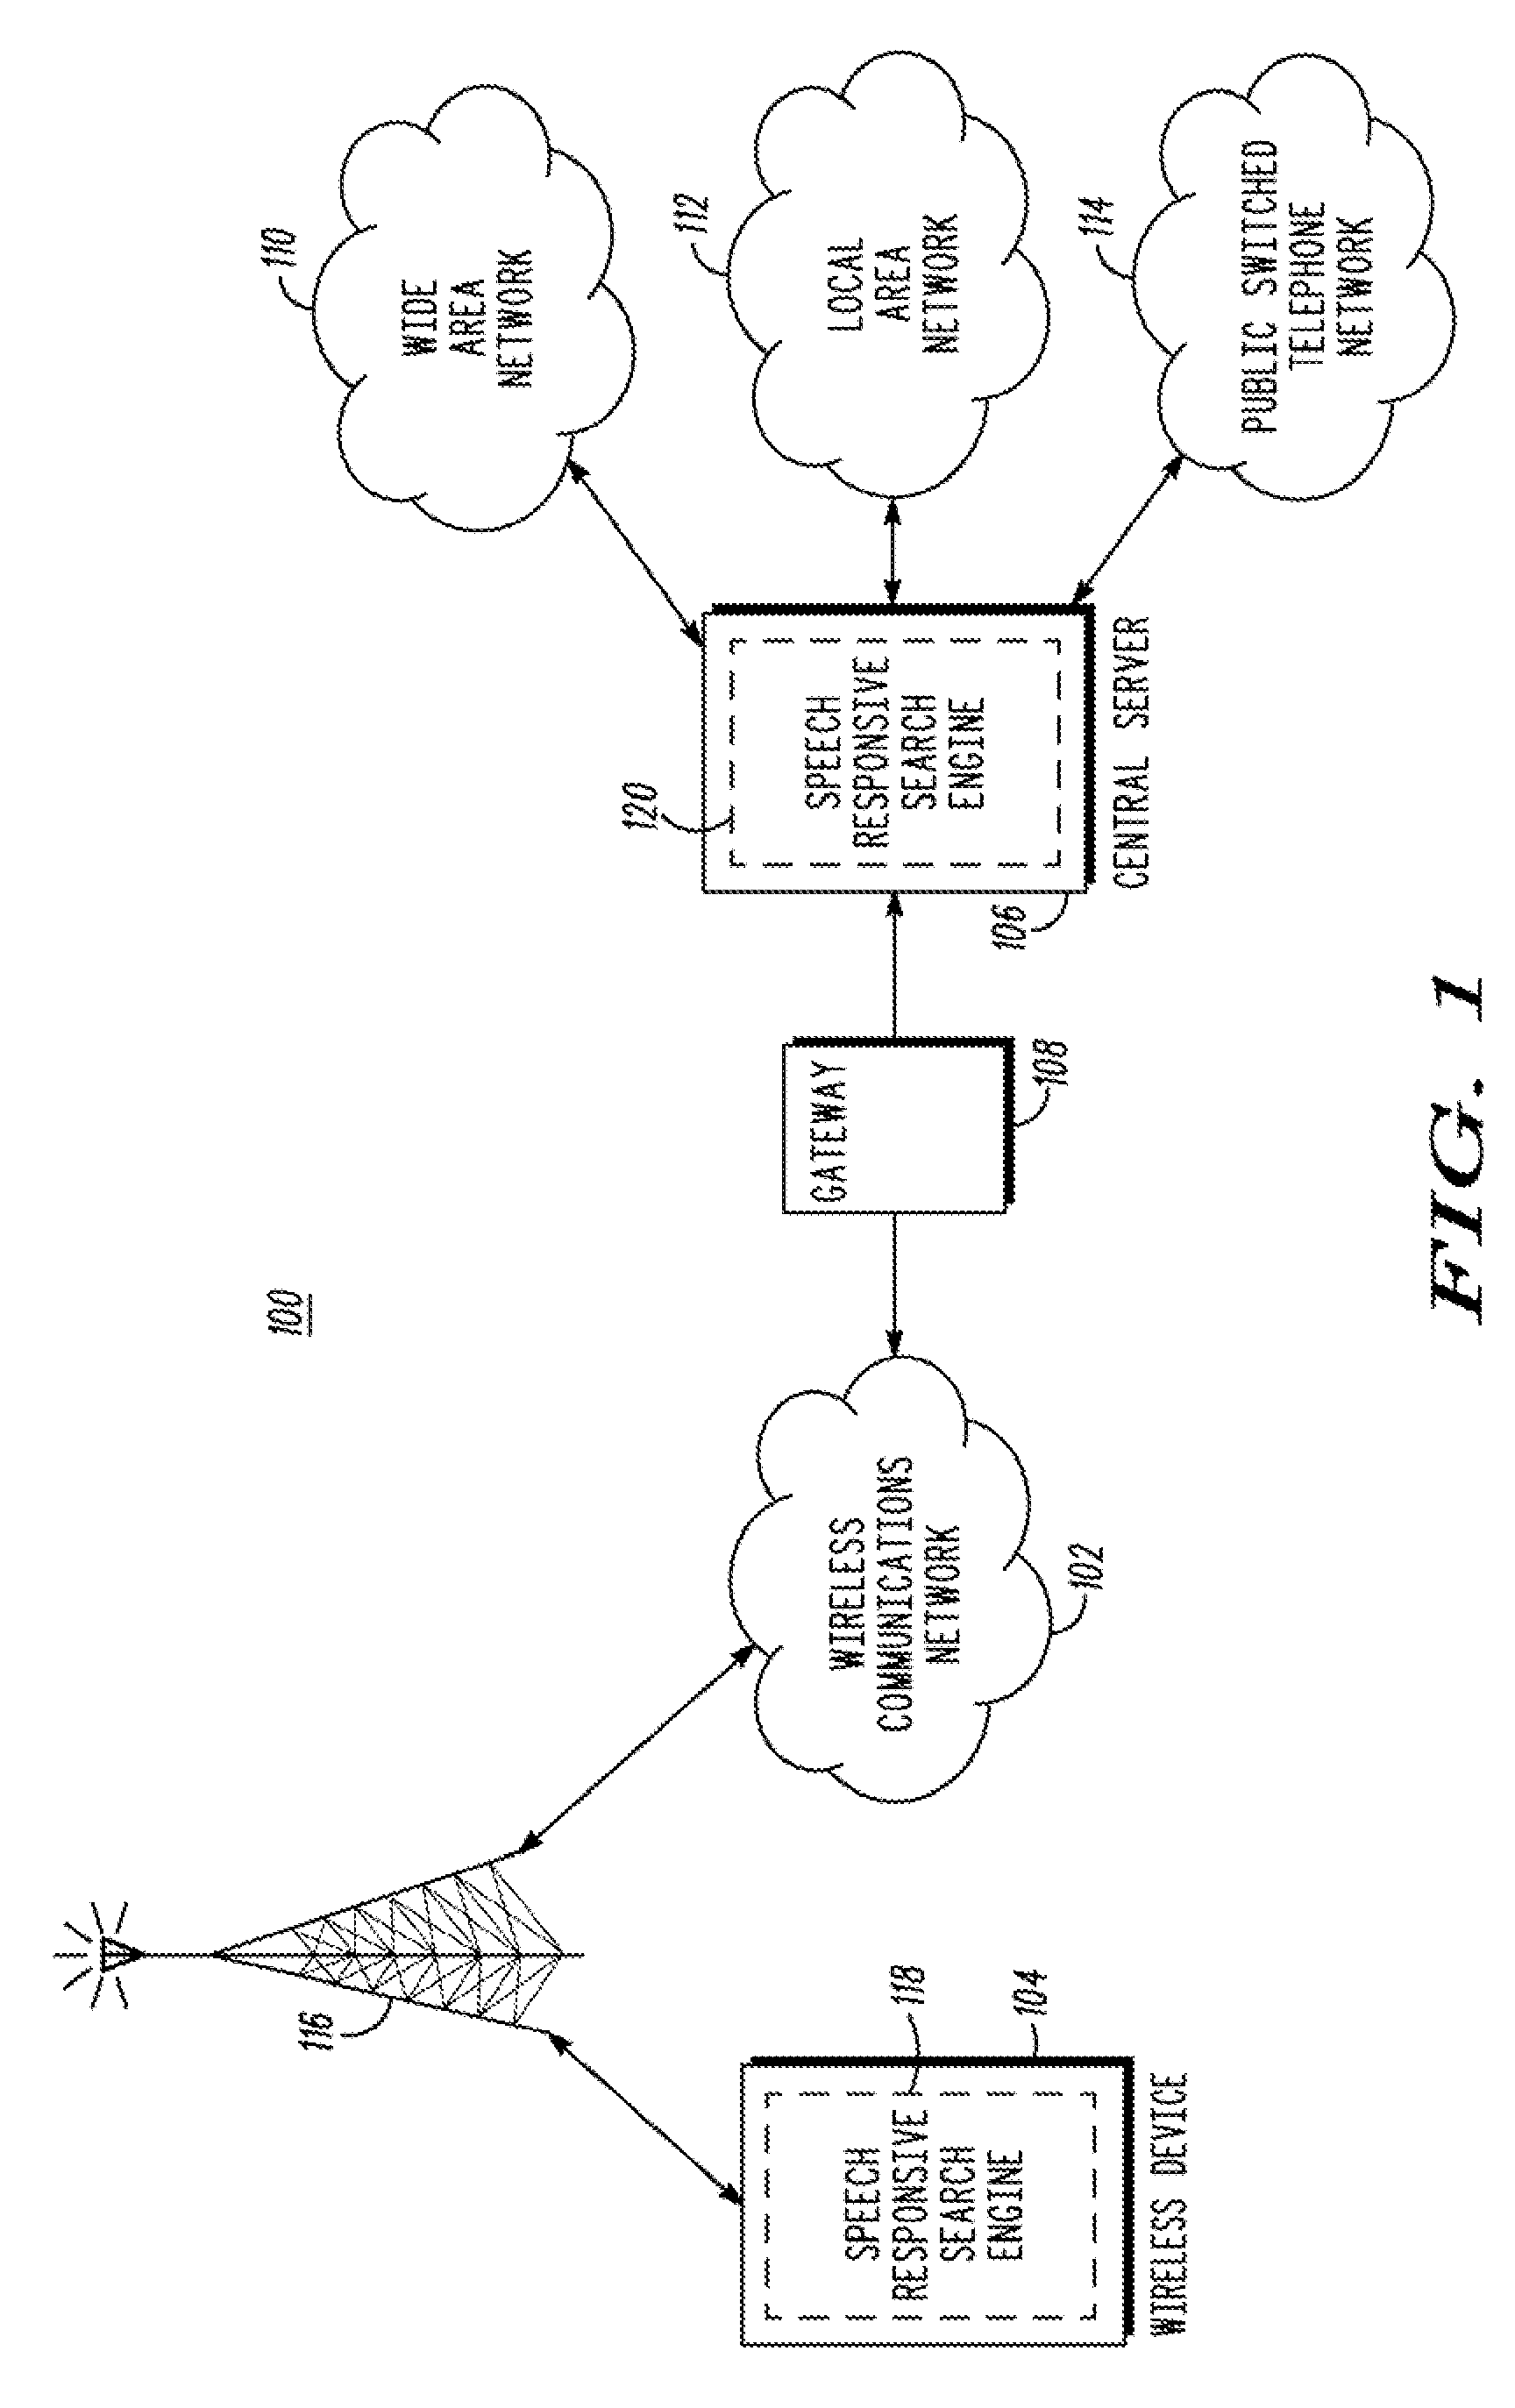 Content selection using speech recognition